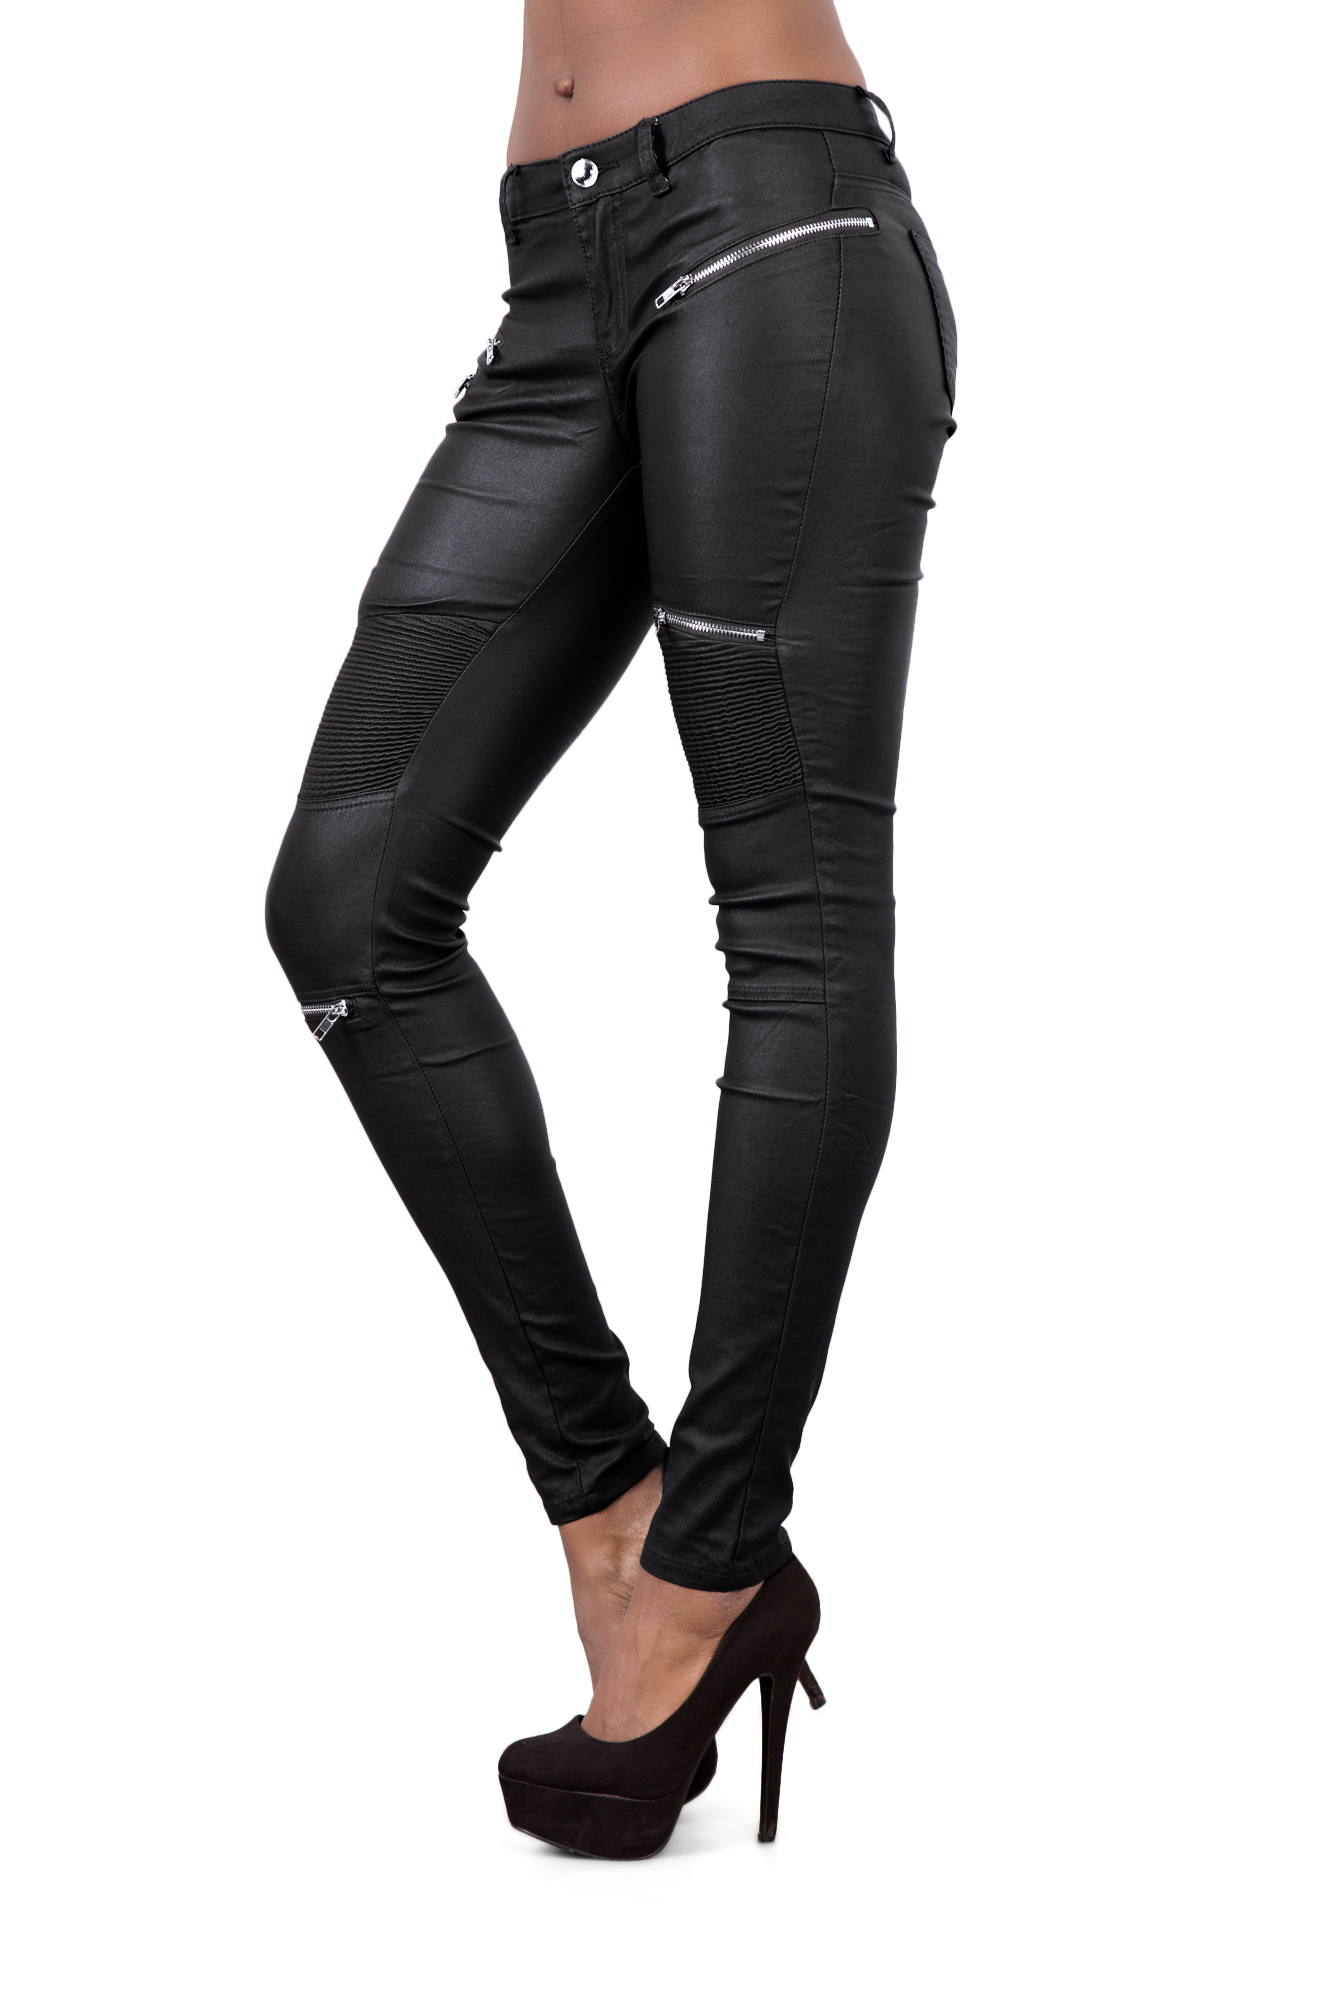 How To Style Leather Leggings in 15 Super Stylish Ways